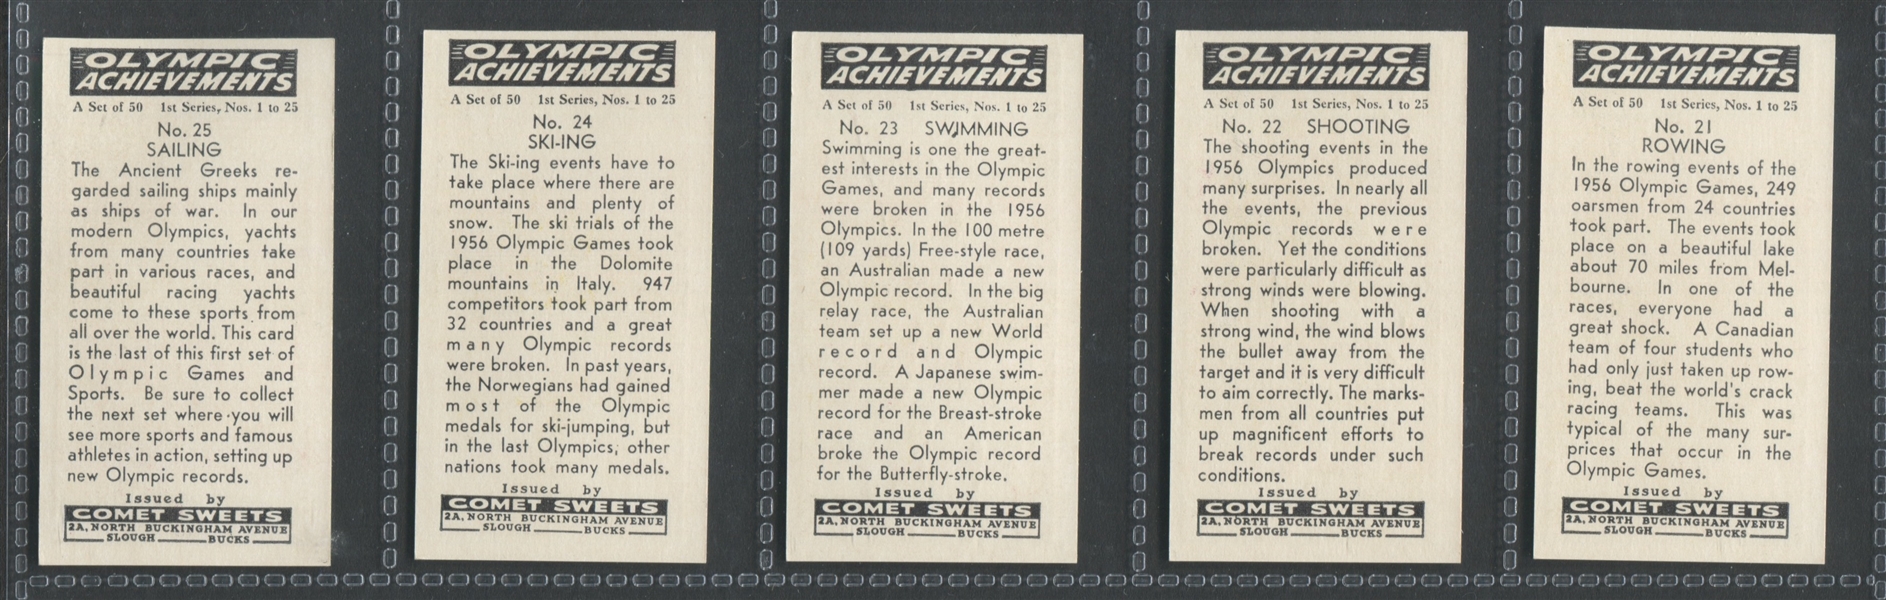 1959 Comet Sweets Olympic Achievements Complete Series 1 Set of (25) Cards